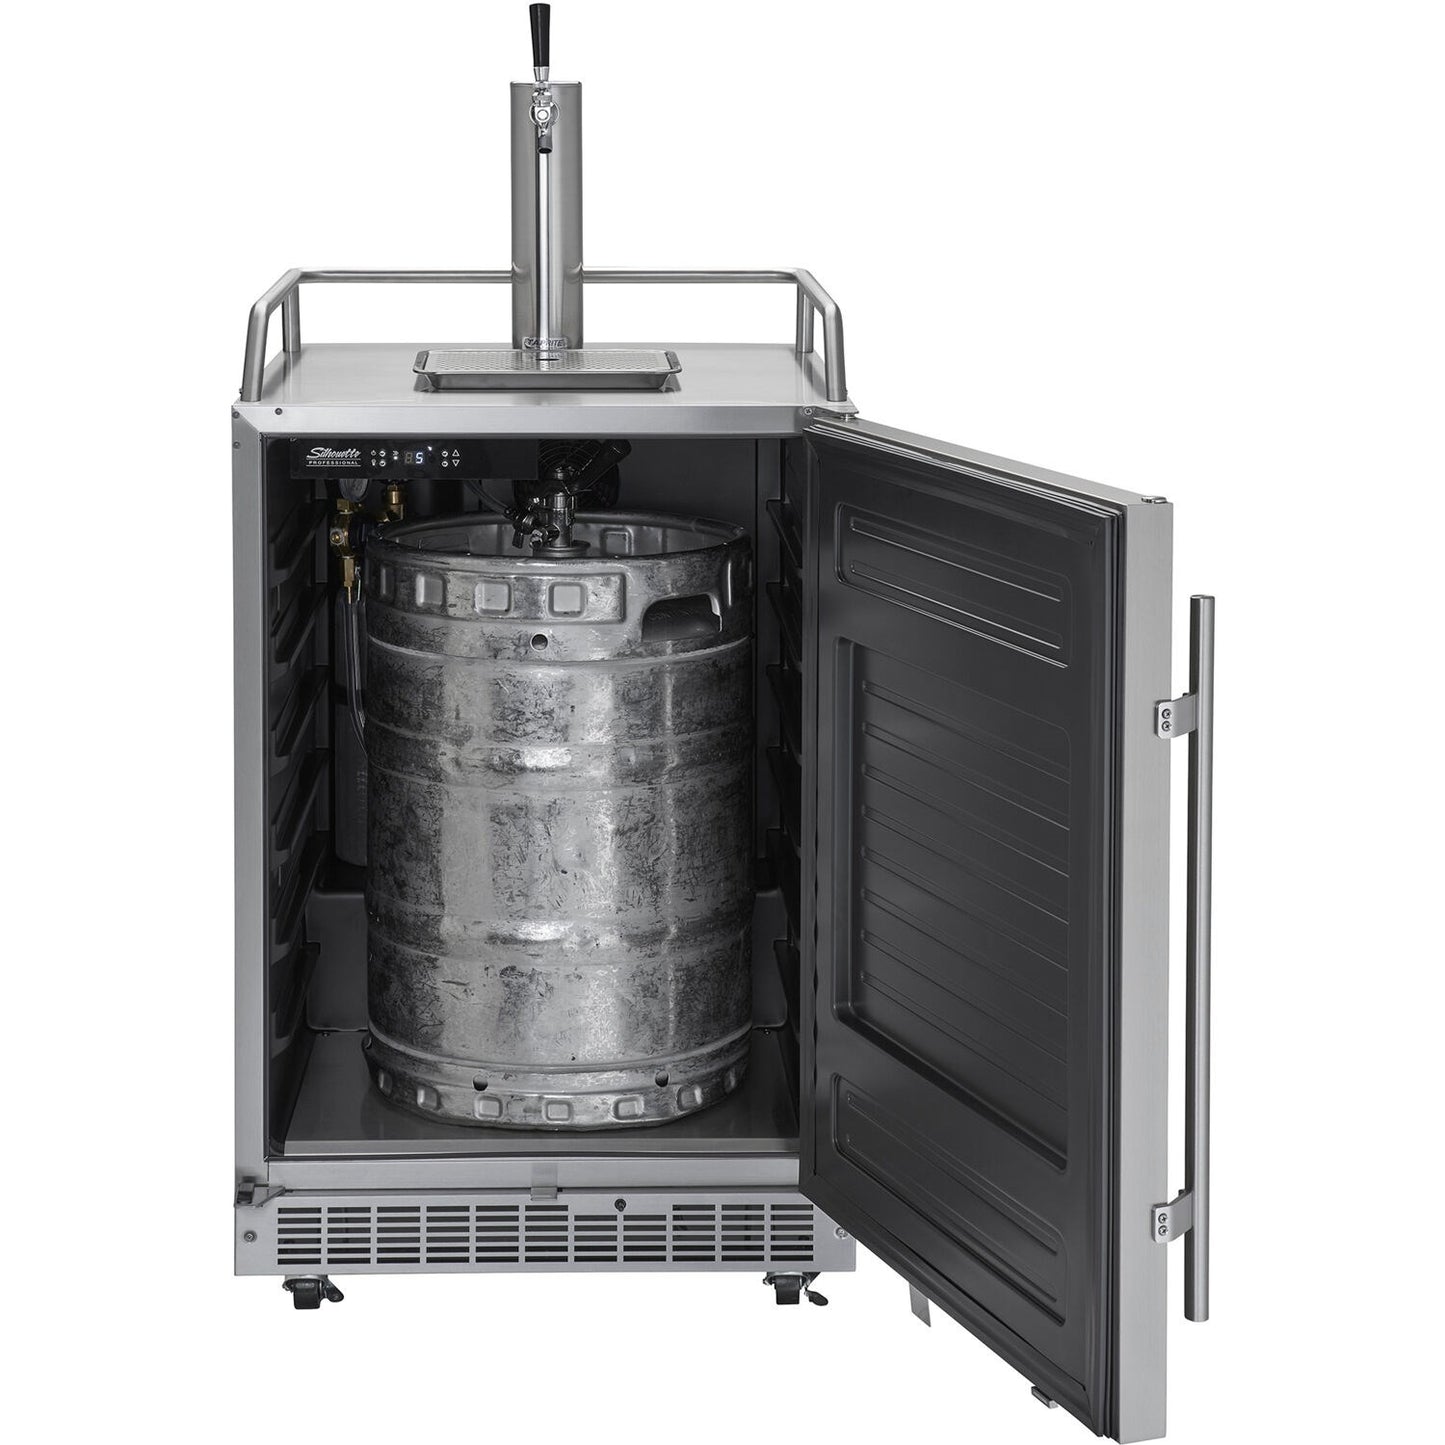 Danby Silhouette 21" Wide Outdoor Beer Kegerator | 304 Stainless Steel Finish